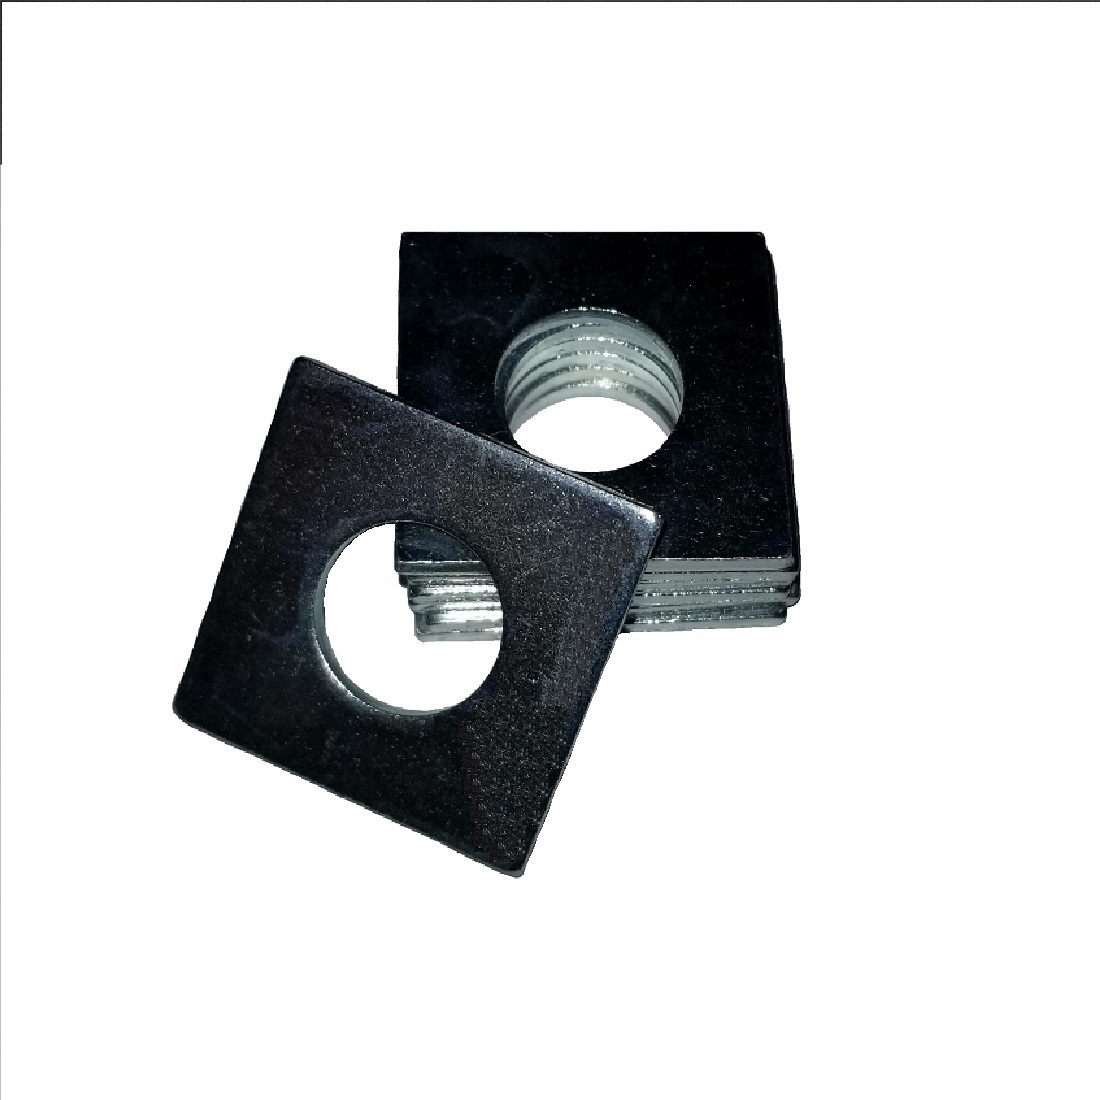 Square OD Washer - 0.203 ID, 0.375 OD, 0.125 Thick, Low Carbon Steel - Case Hard, Black Oxide